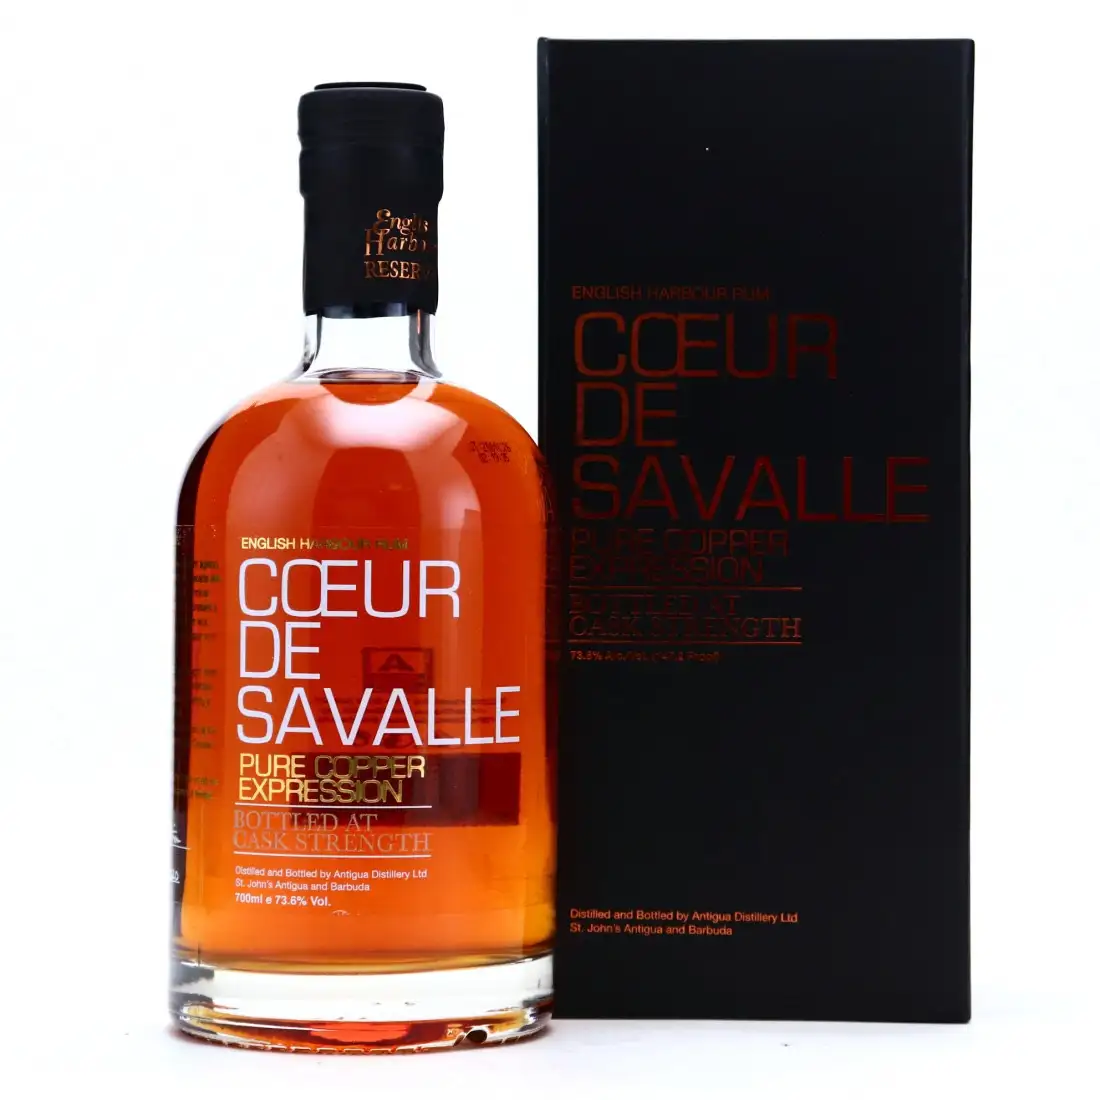 Image of the front of the bottle of the rum Coeur de Savalle